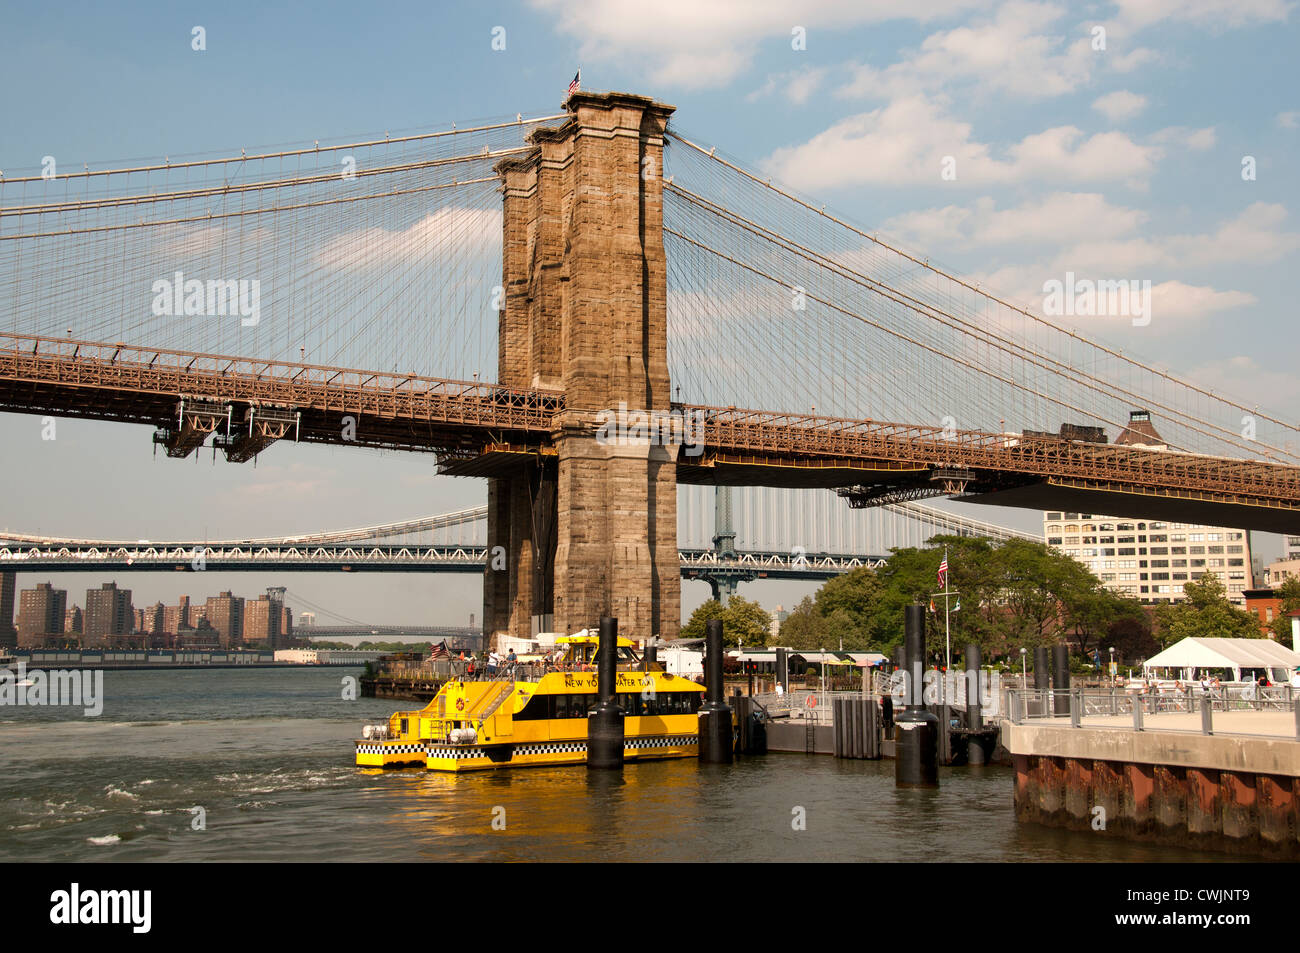 Fulton Ferry Landing Brooklyn Bridge East River, New York City United States Banque D'Images